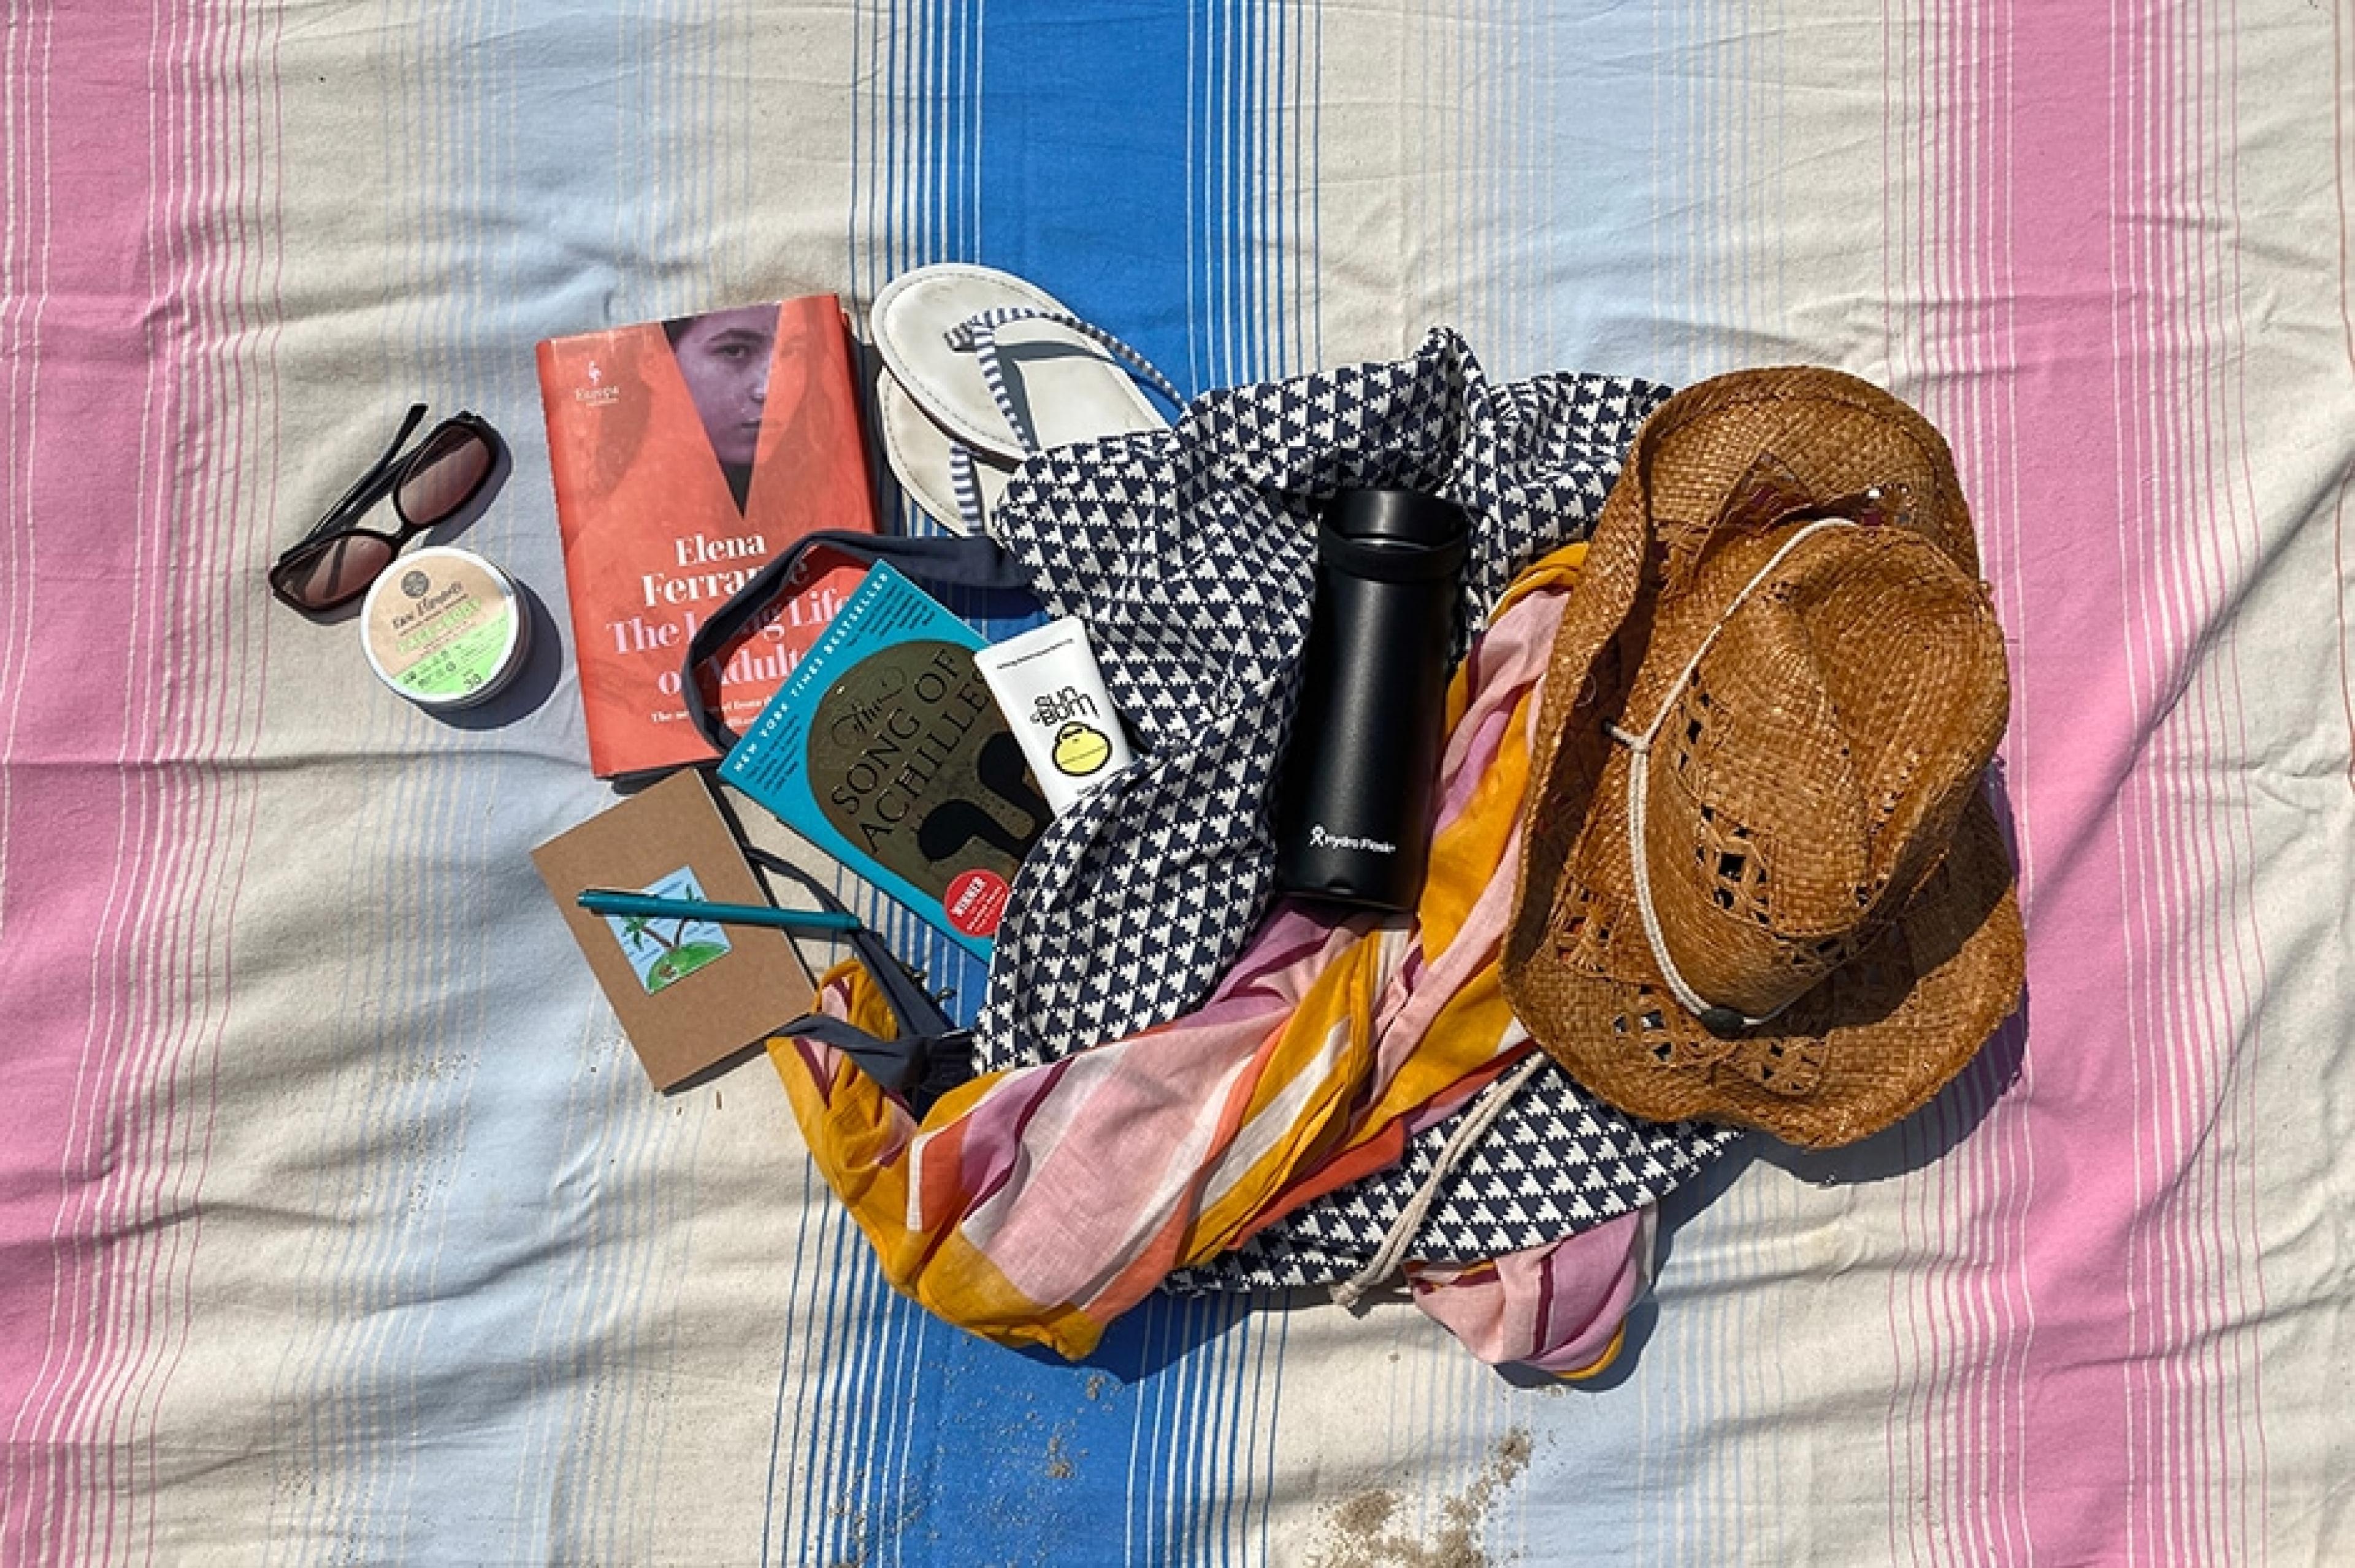 contents of a beach bag emptied on a beach towel